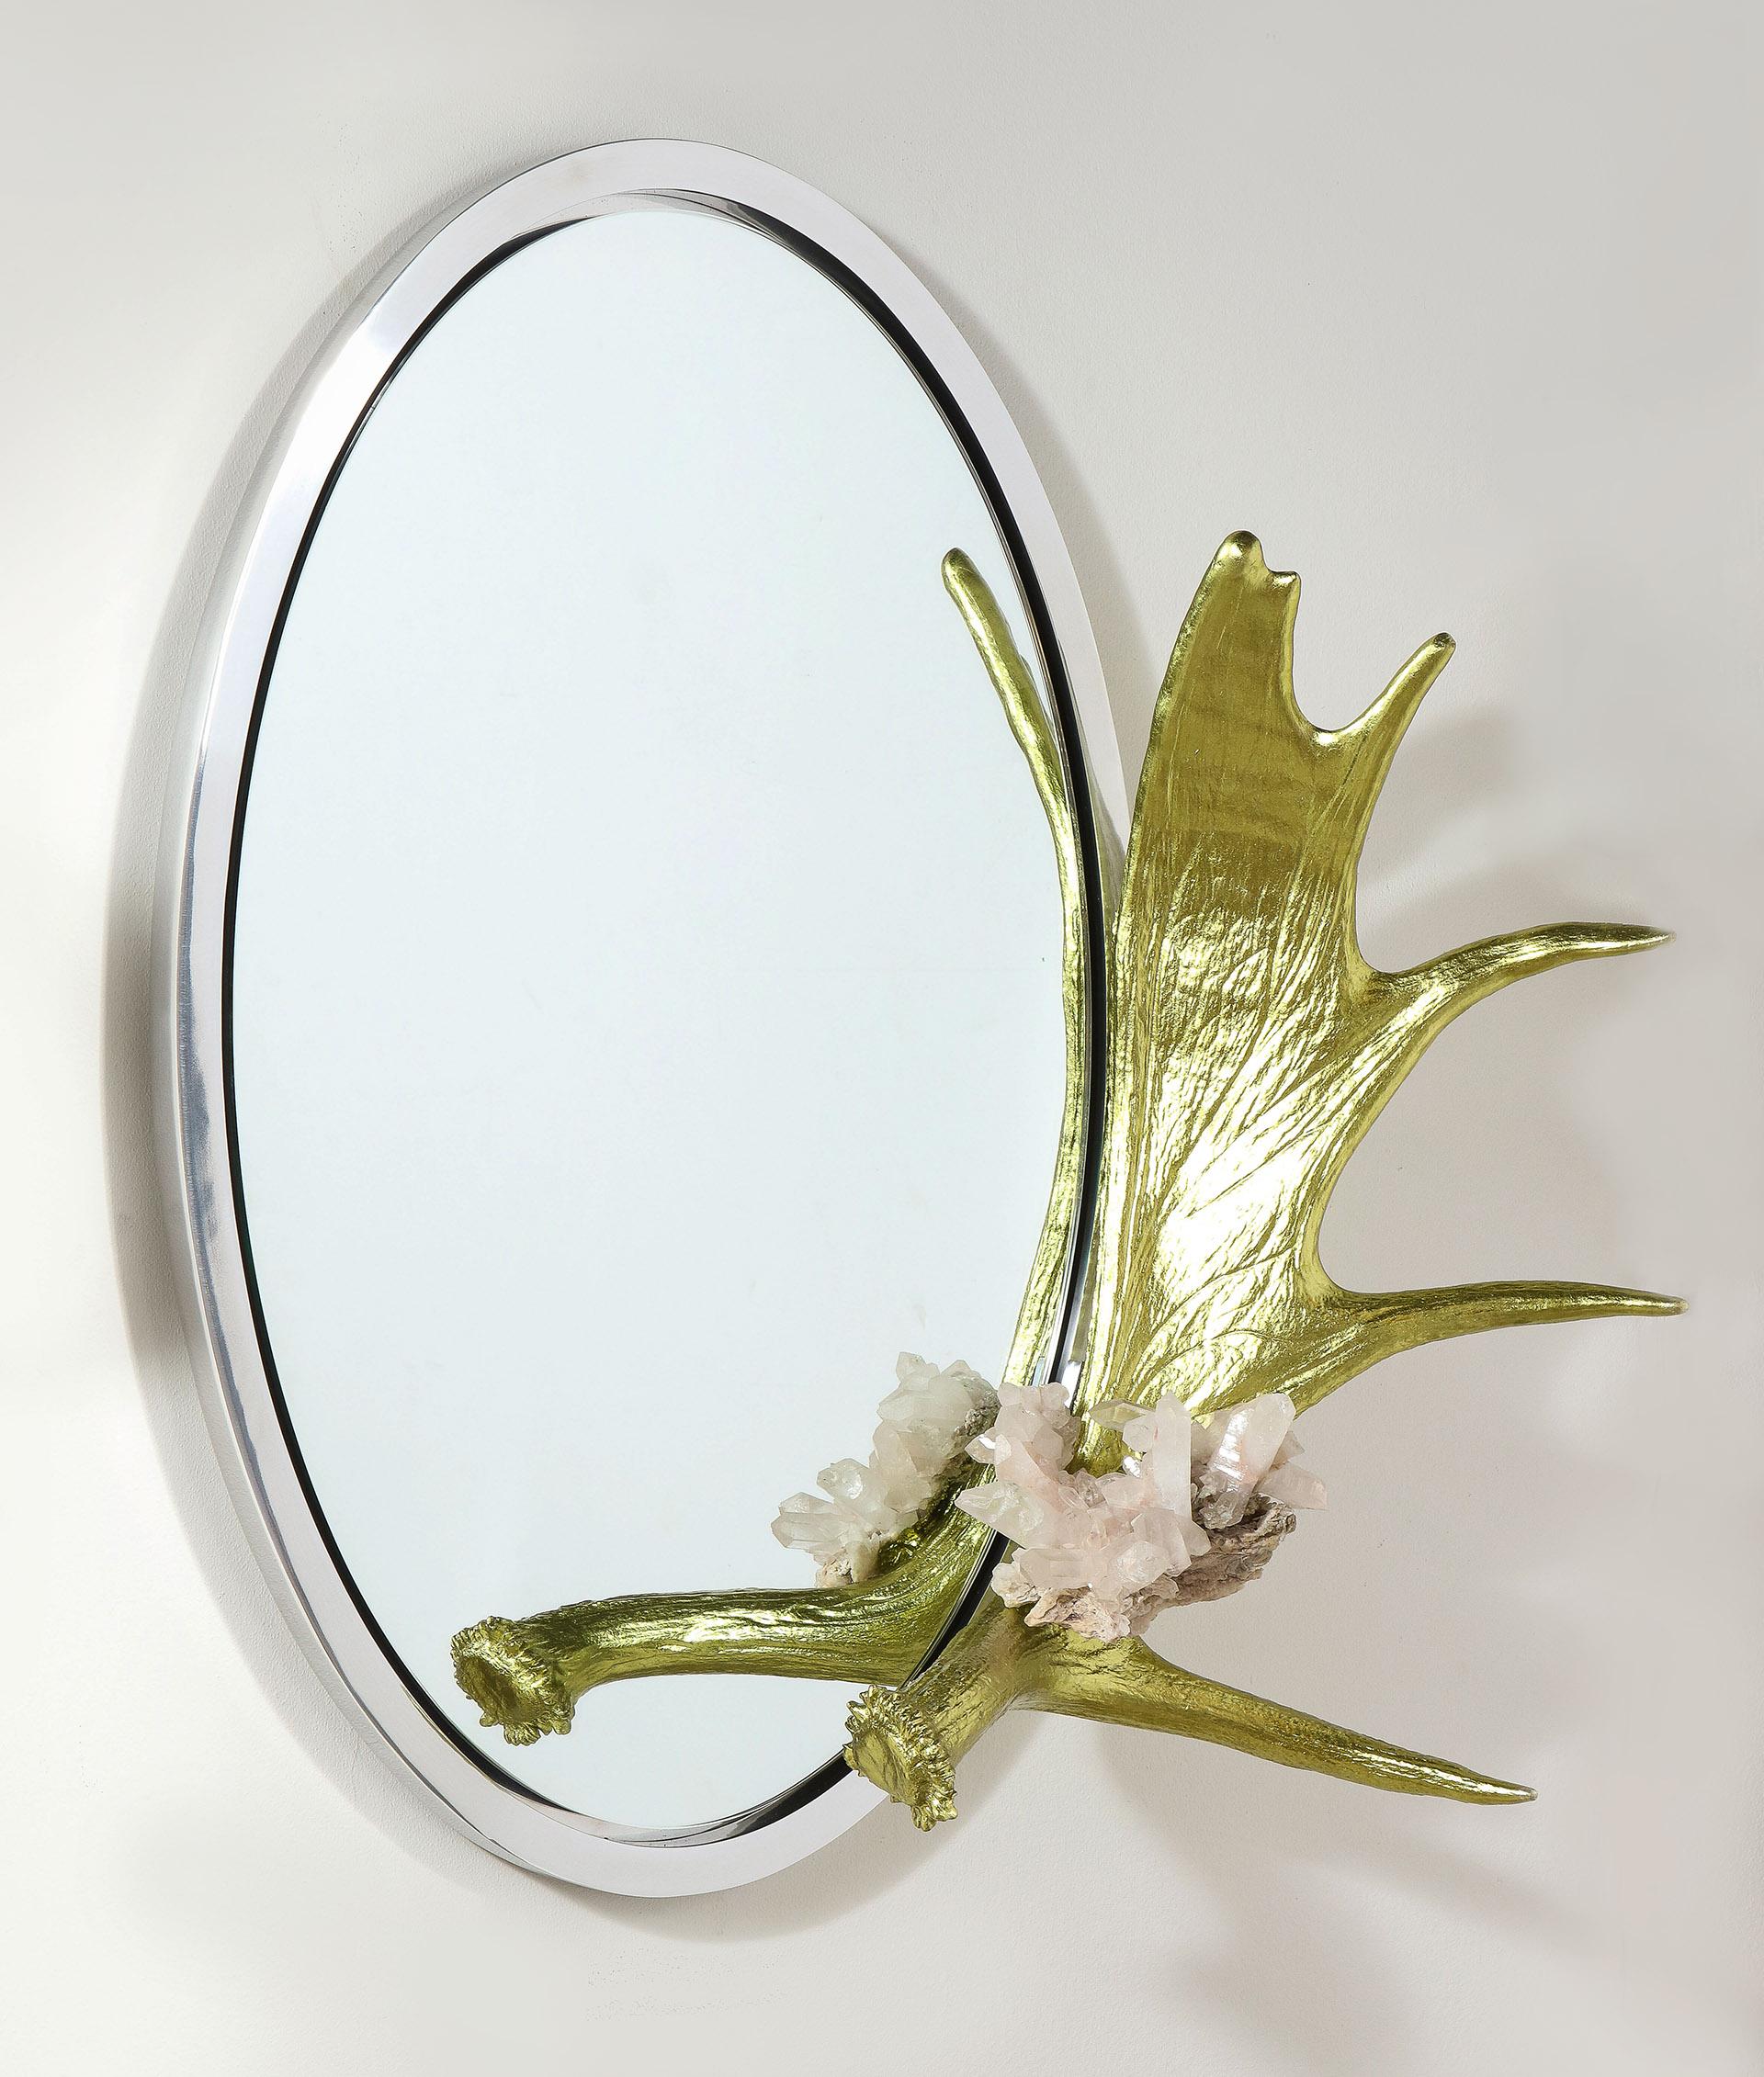 A quartz crystal mounted onto a silver leaf Alaskan Moose Paddle, the whole mounted to an oval mirror with a polished stainless steel frame.